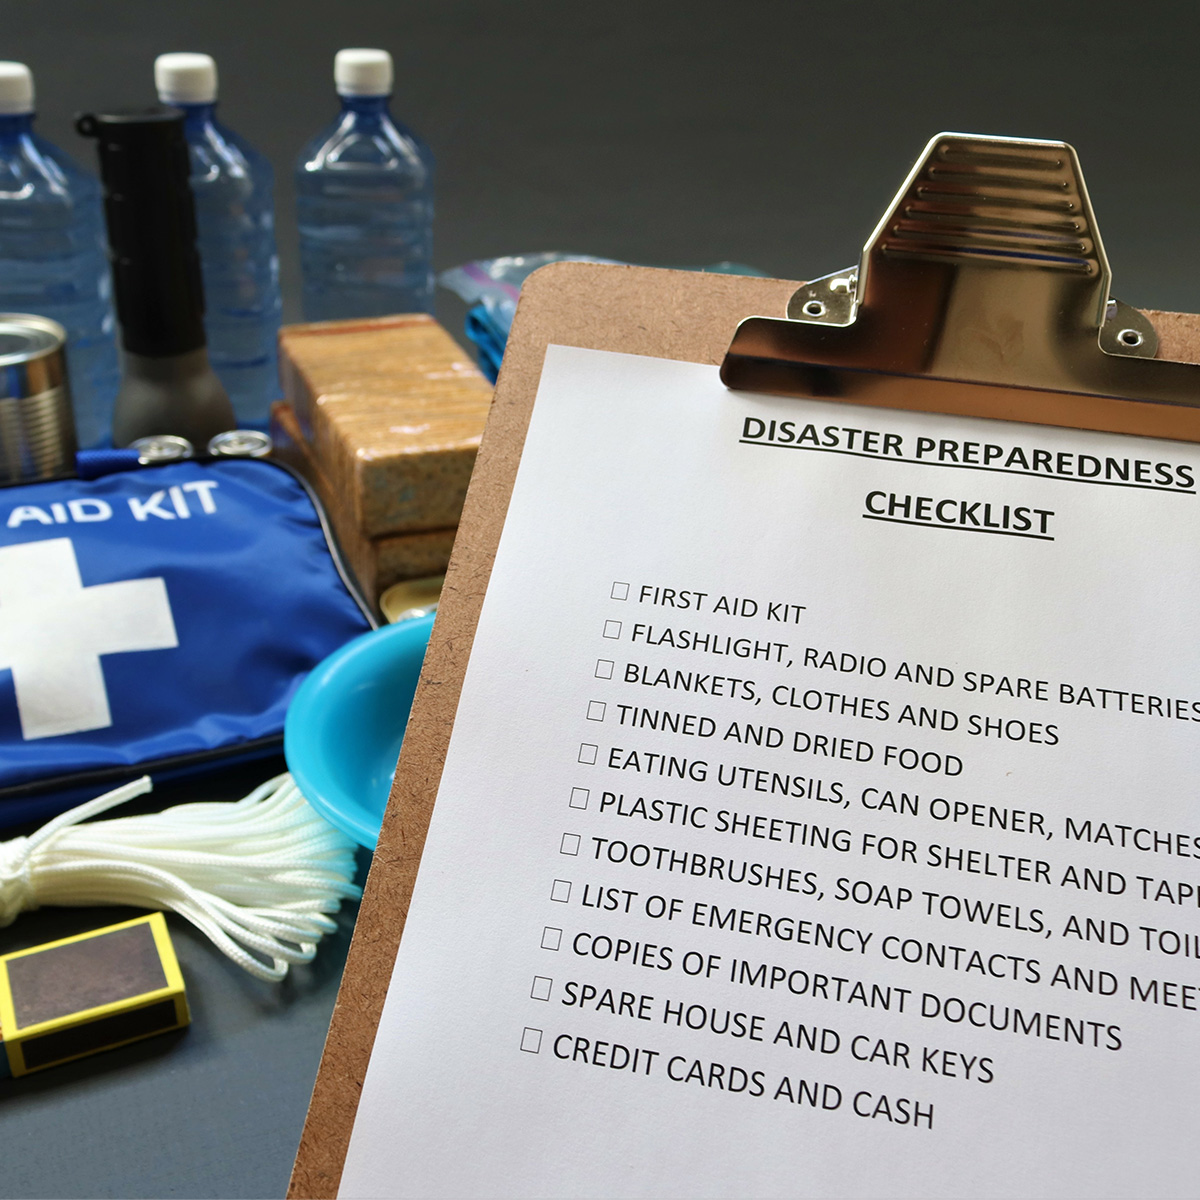 An example of a disaster preparedness kit, including a checklist, first aid kit, canned food, and water bottles.